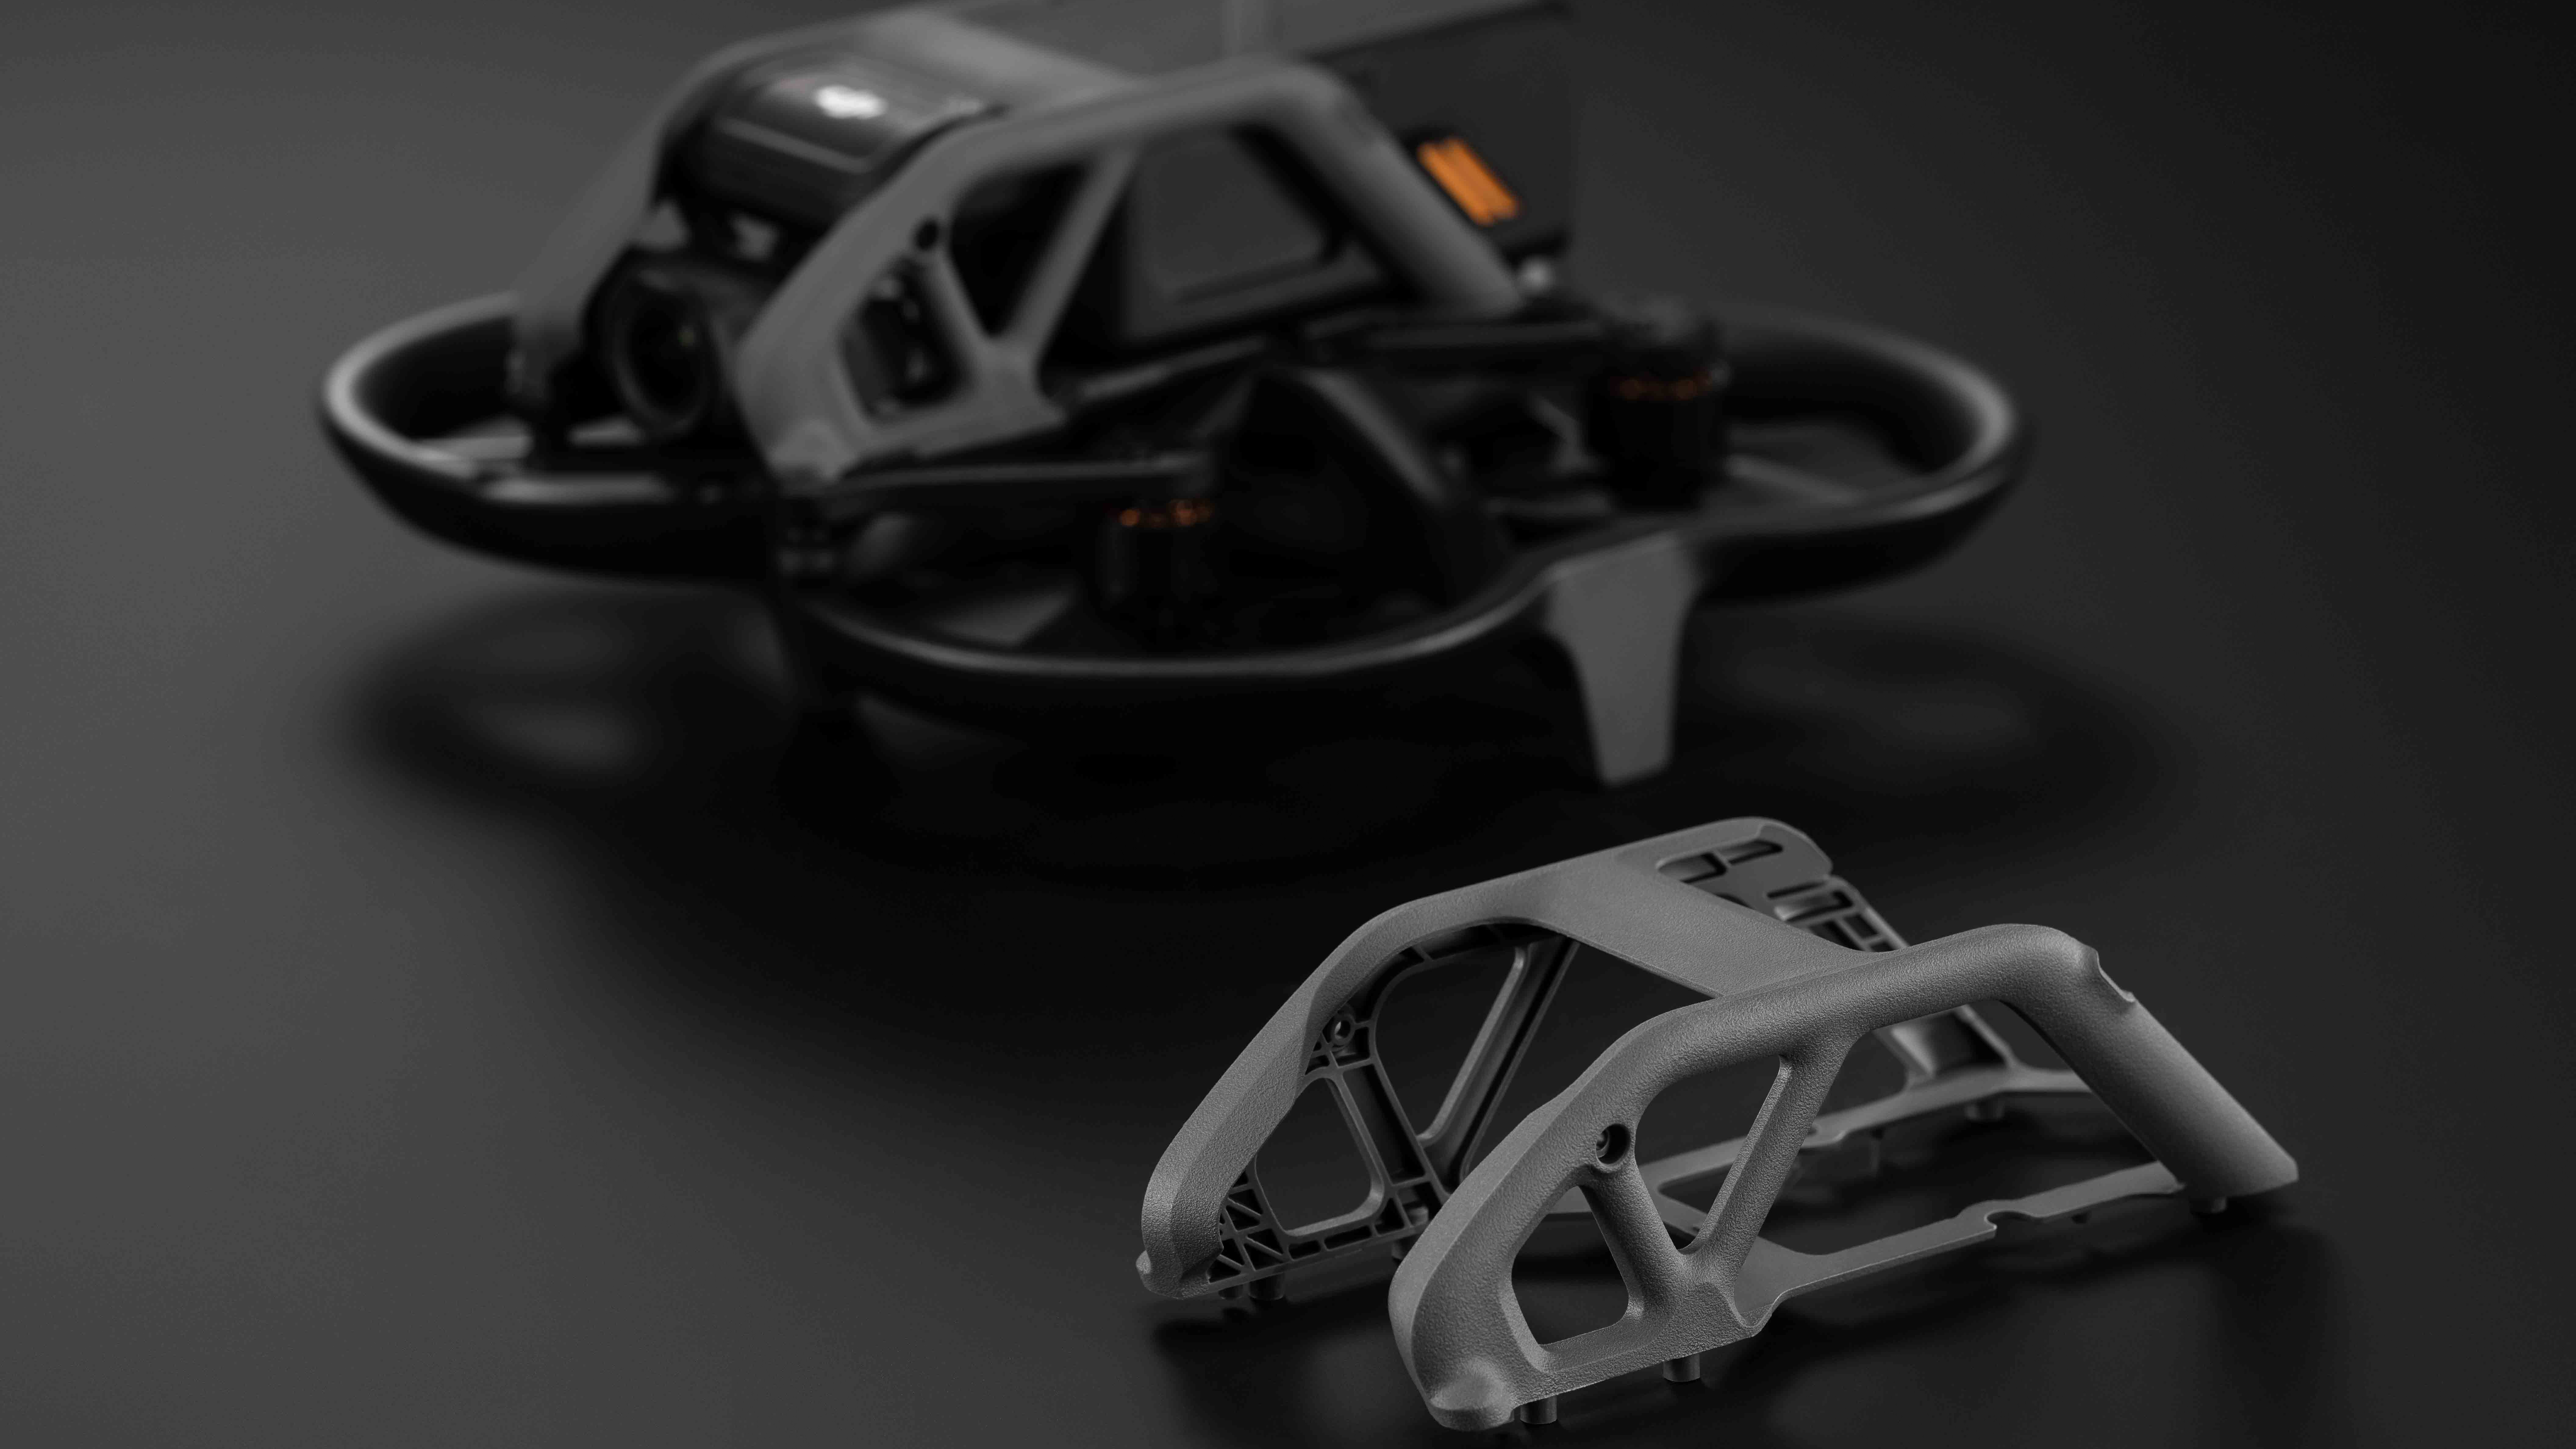 The DJI Avata drone next to a replacement body frame